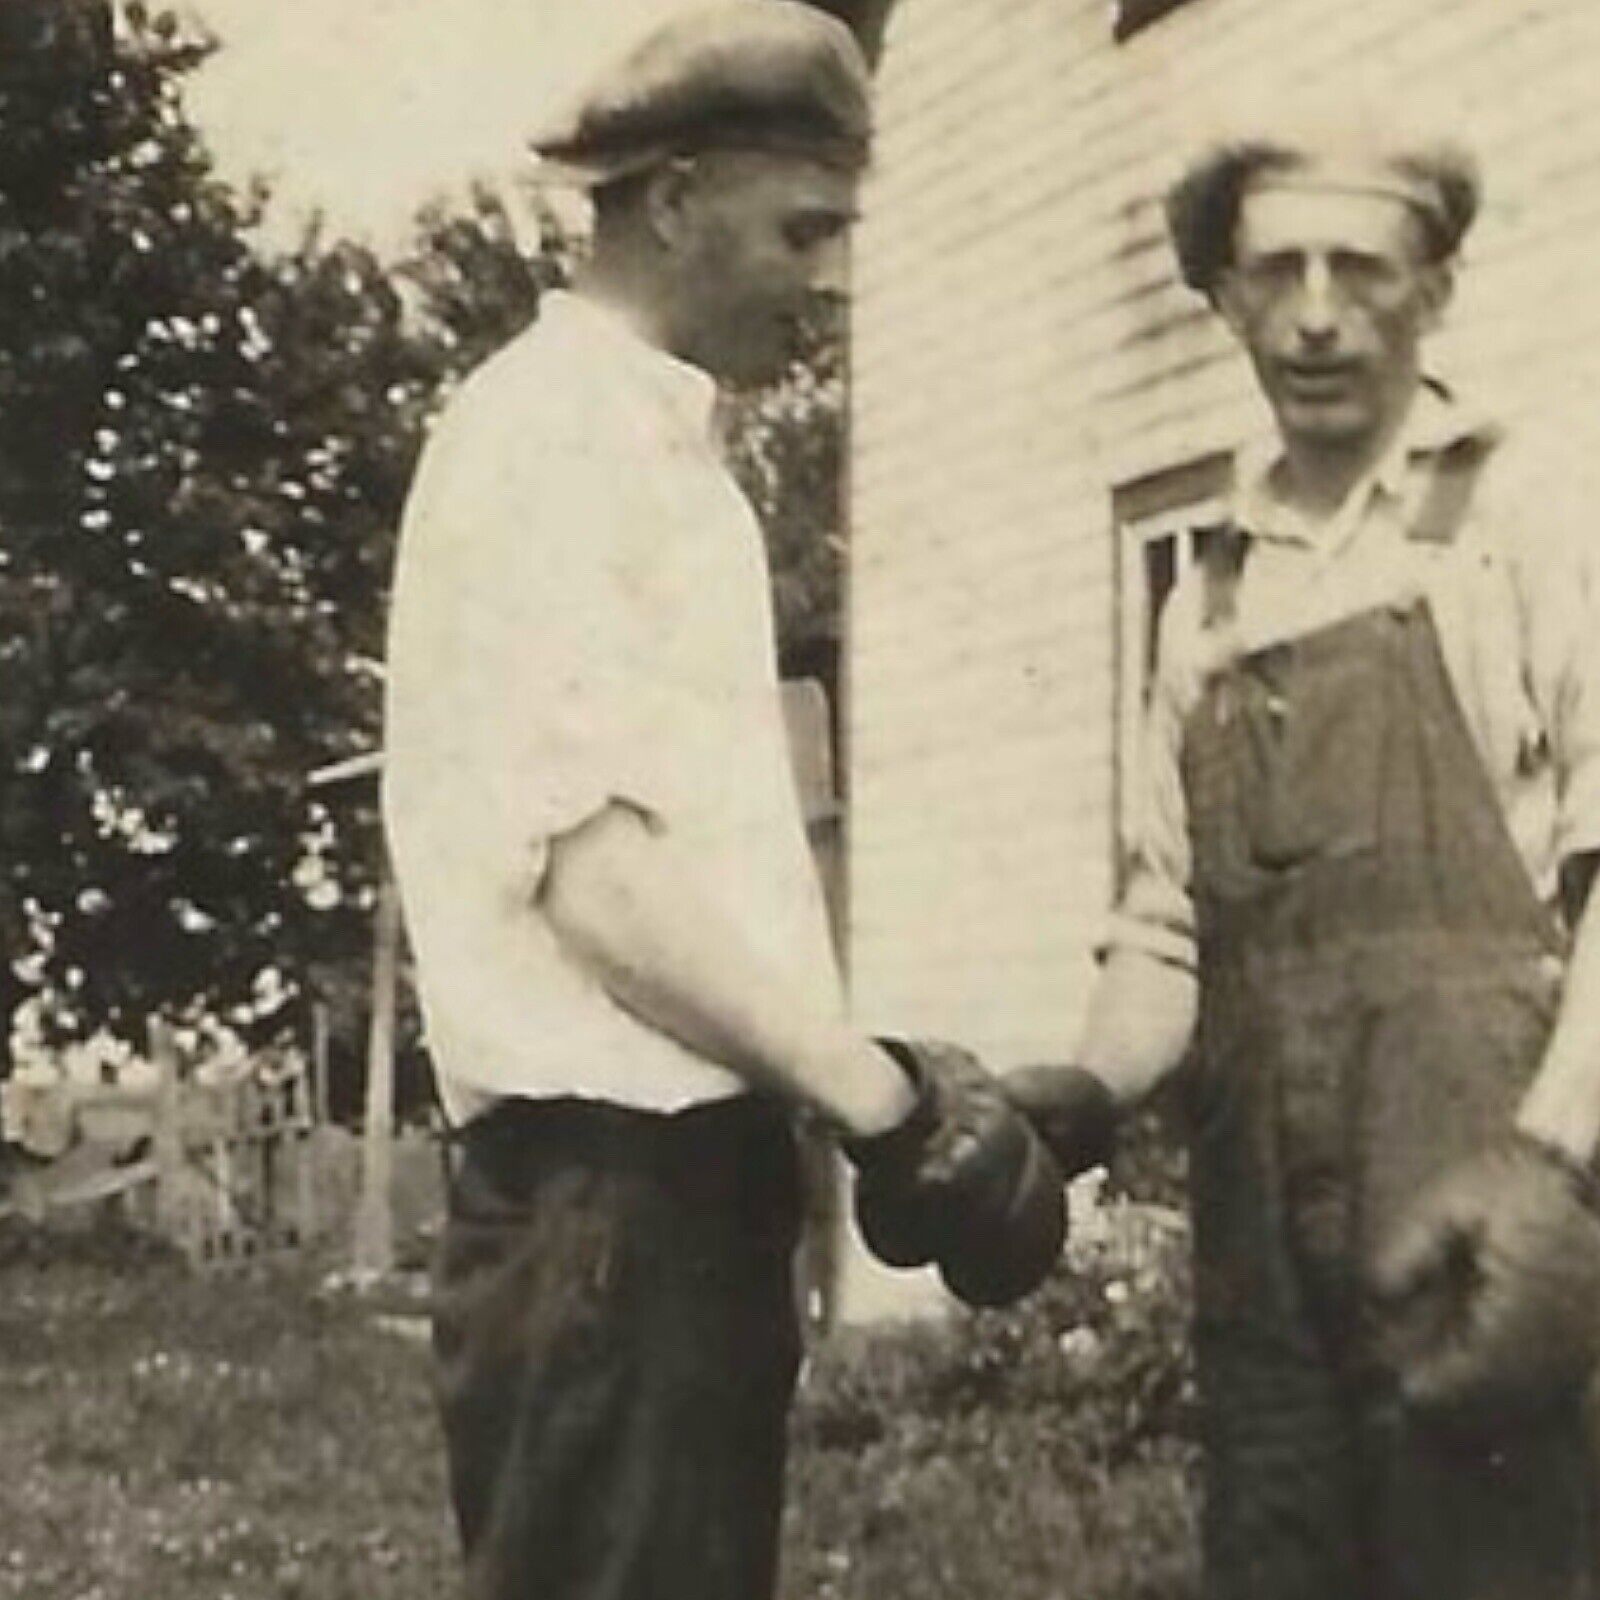 Vintage Snapshot Photo Two Men Shaking Hands Wearing Boxing Gloves Overalls